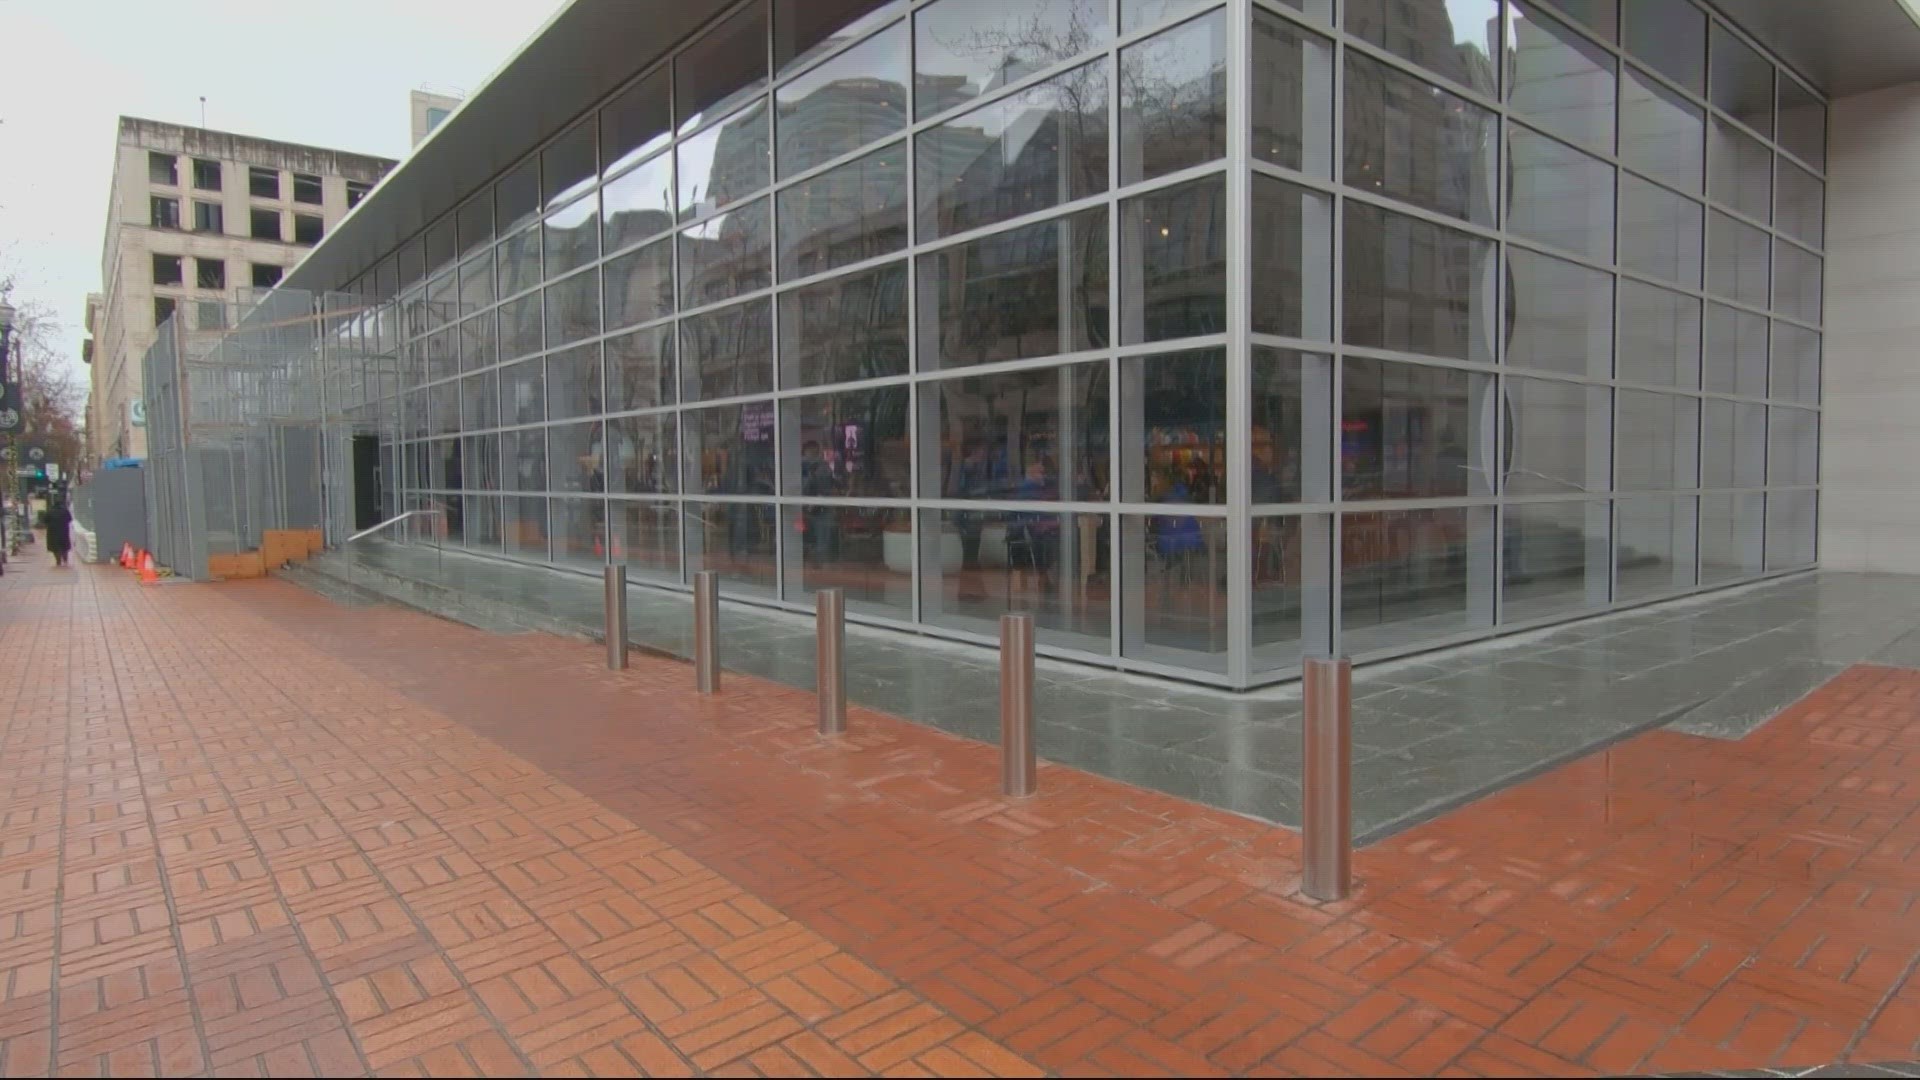 The protective barrier around the all-glass storefront has been in place for several years. Business leaders see the removal as an encouraging sign.